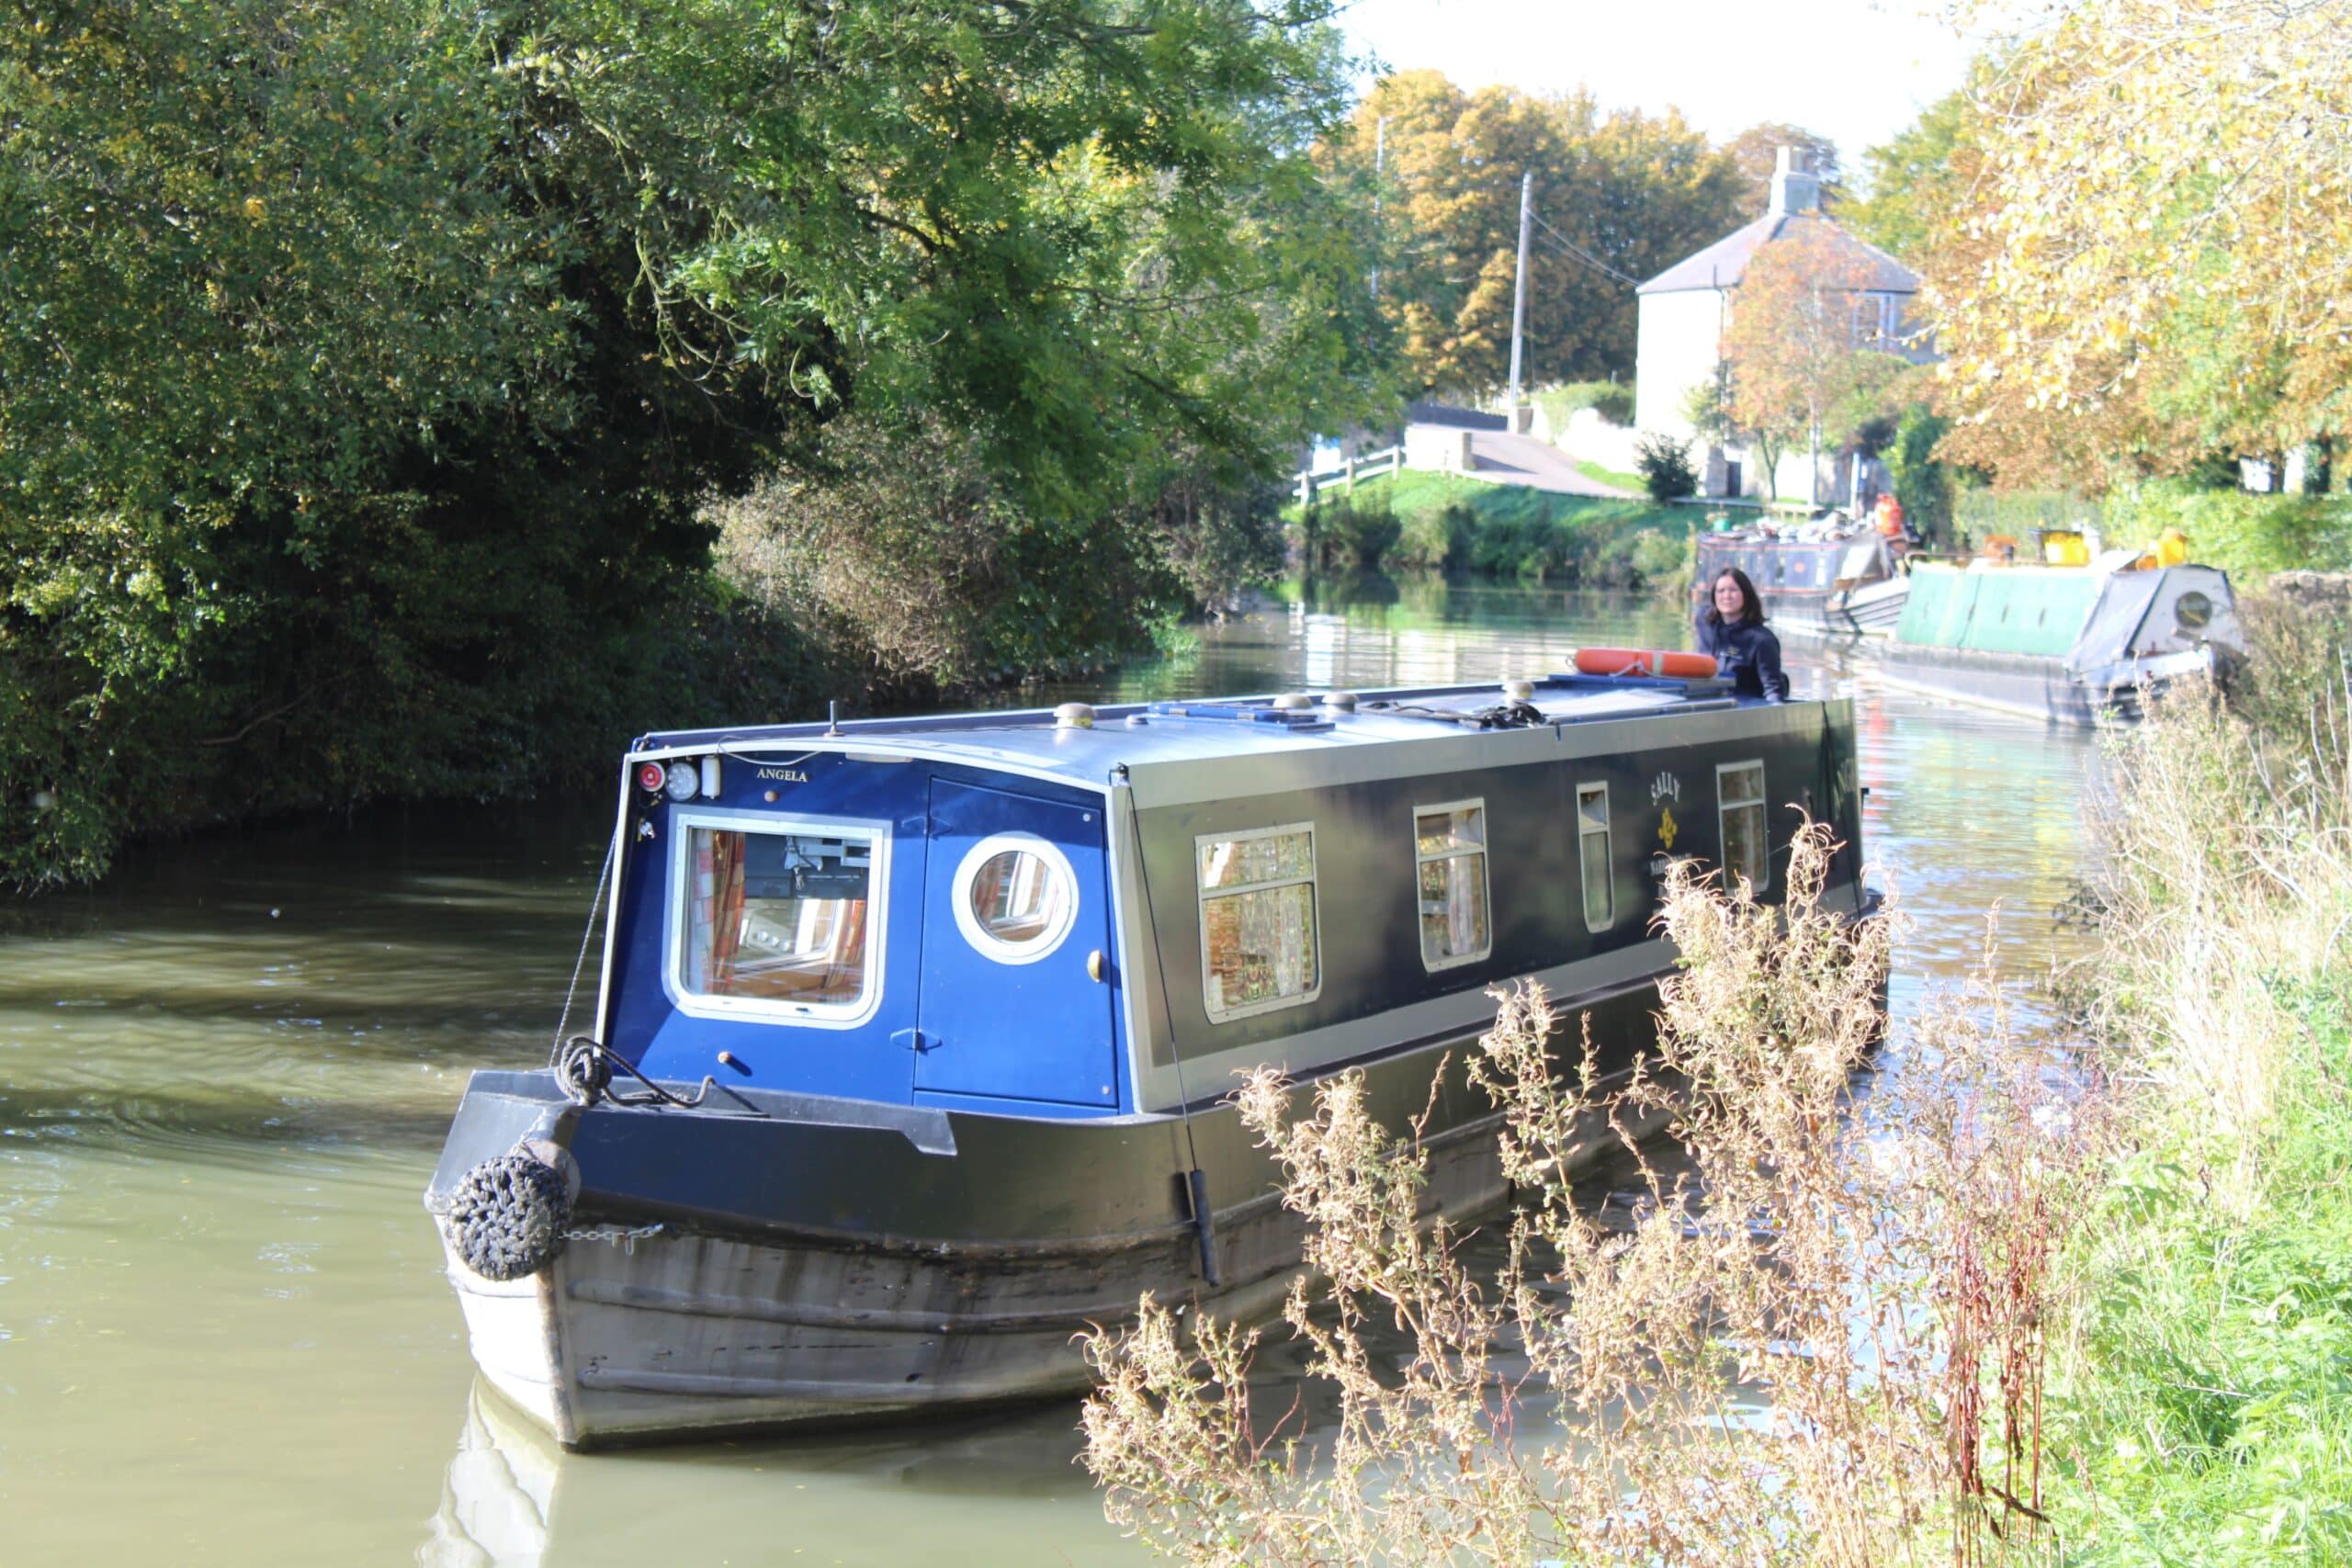 Anglo Welsh offers canal boat hire on the Kennet & Avon Canal from Bradford on Avon